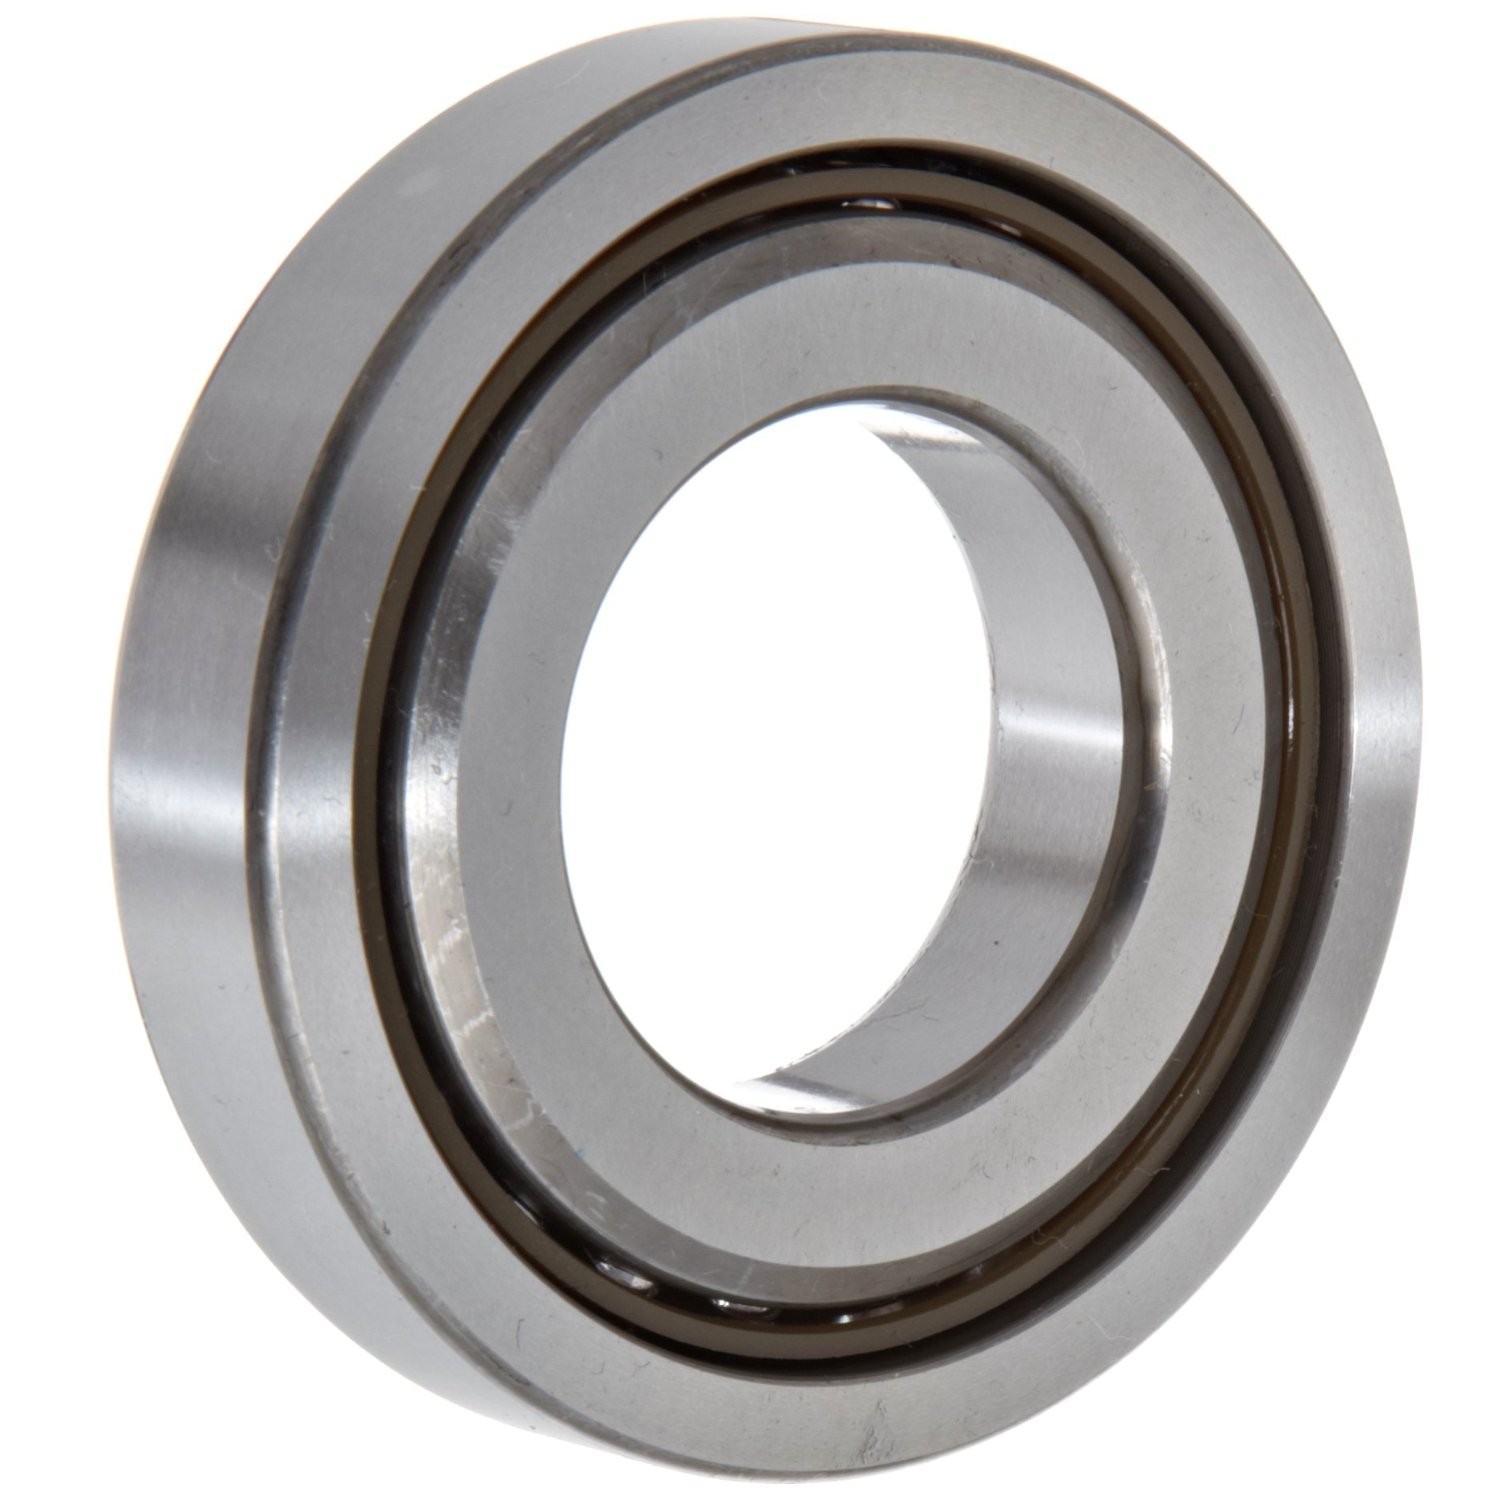 Wholesale 75TAC110B ball screw support bearing,high precision bearings from china suppliers